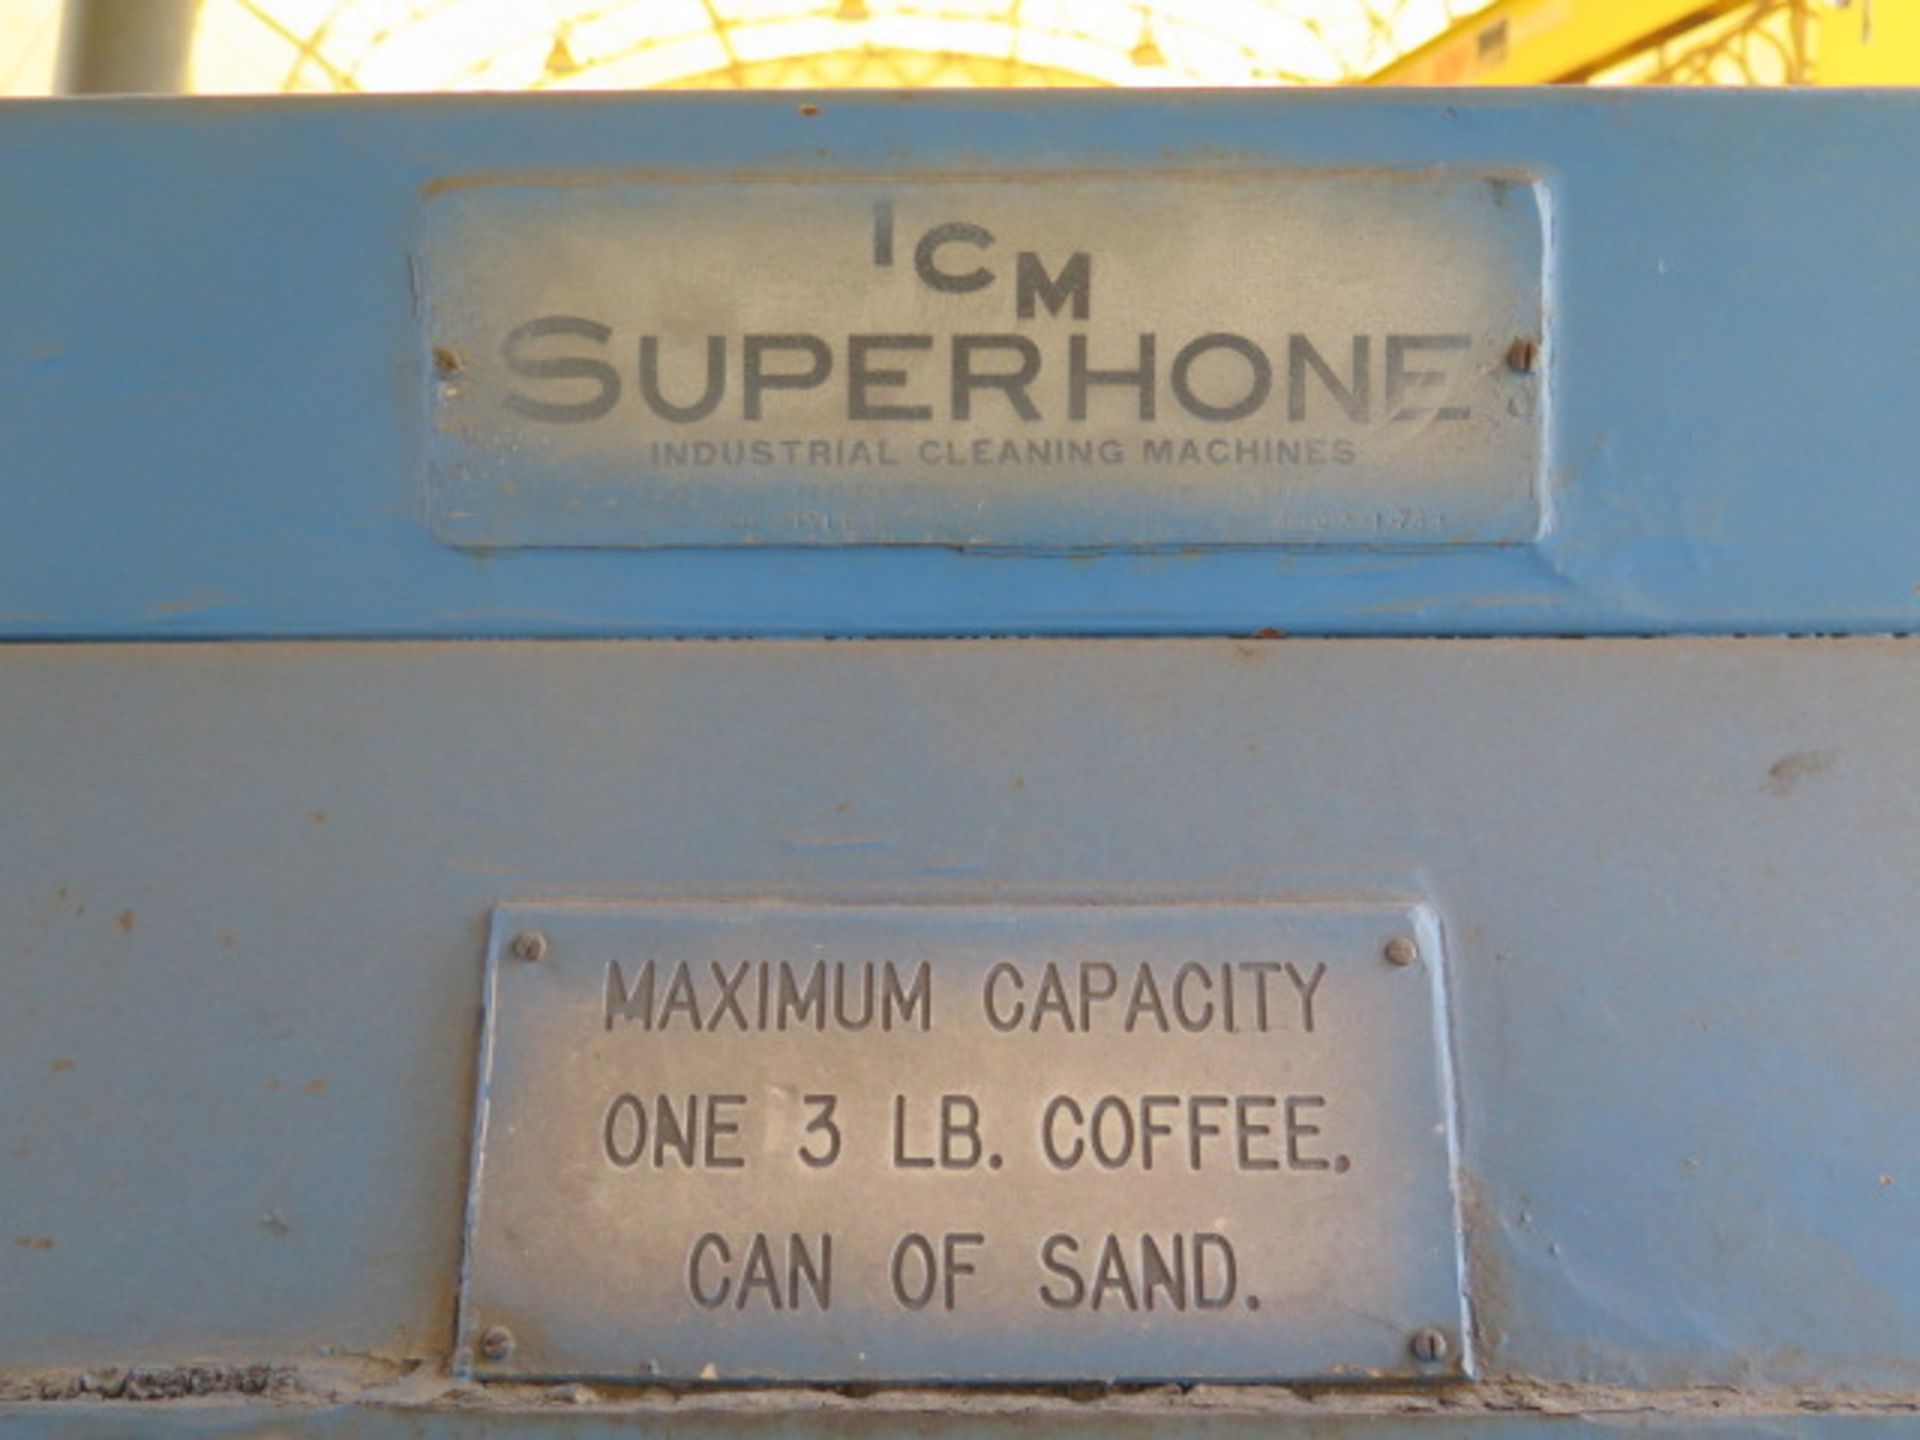 ICM Super Hone” Dry Blast Cabinet w/ Dust Collector (SOLD AS-IS - NO WARRANTY) - Image 7 of 7